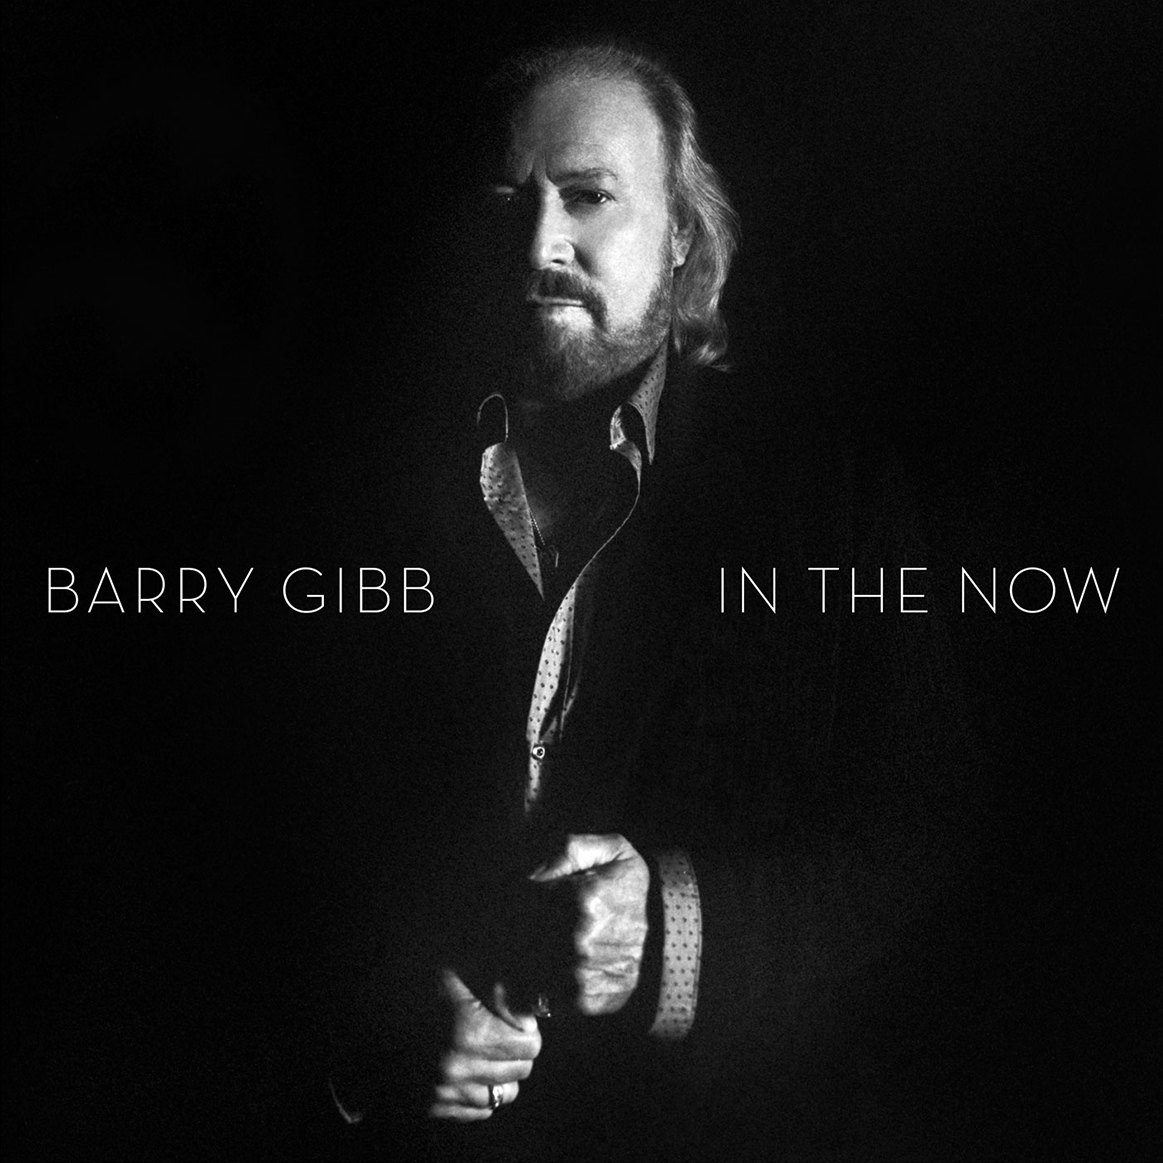 Barry Gibb - In The Now (2016) [HDTracks FLAC 24bit/44,1kHz]